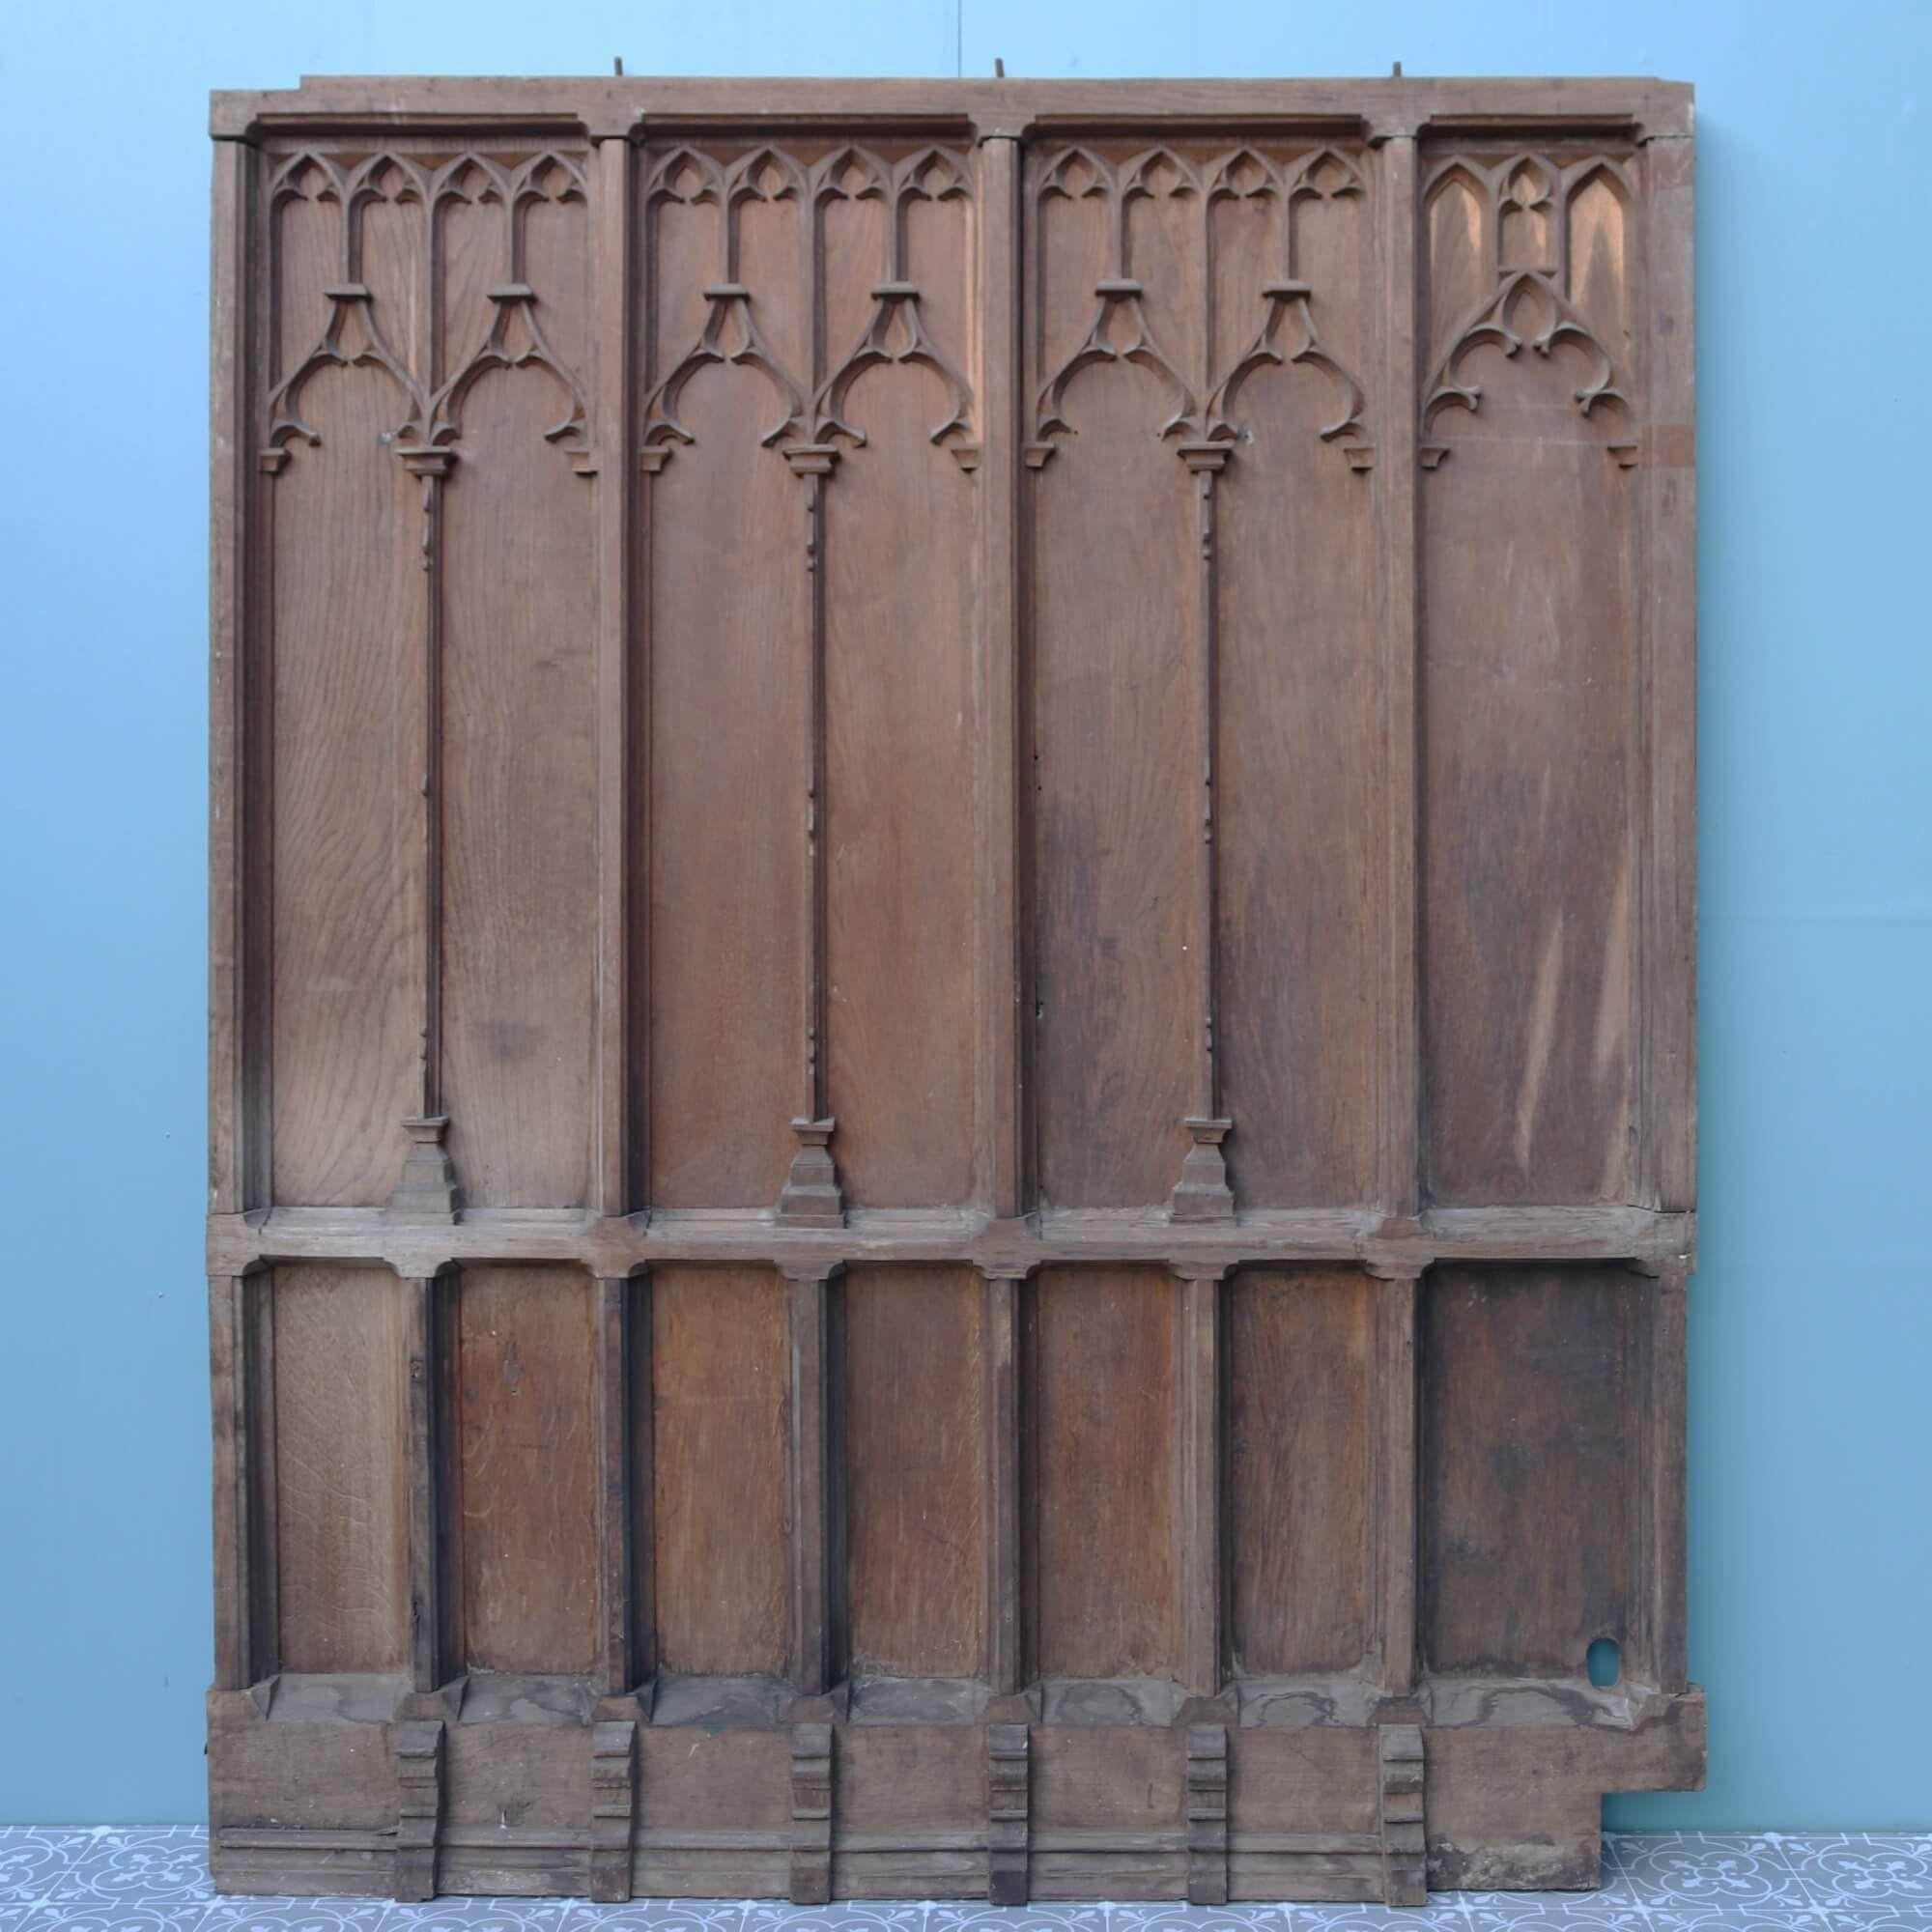 A set of beautifully carved ecclesiastical style English oak wall paneling dating from the late 19th / early 20th century. This reclaimed wall paneling comprises of 3 full height, solid oak panels of varying widths (see below for individual details)